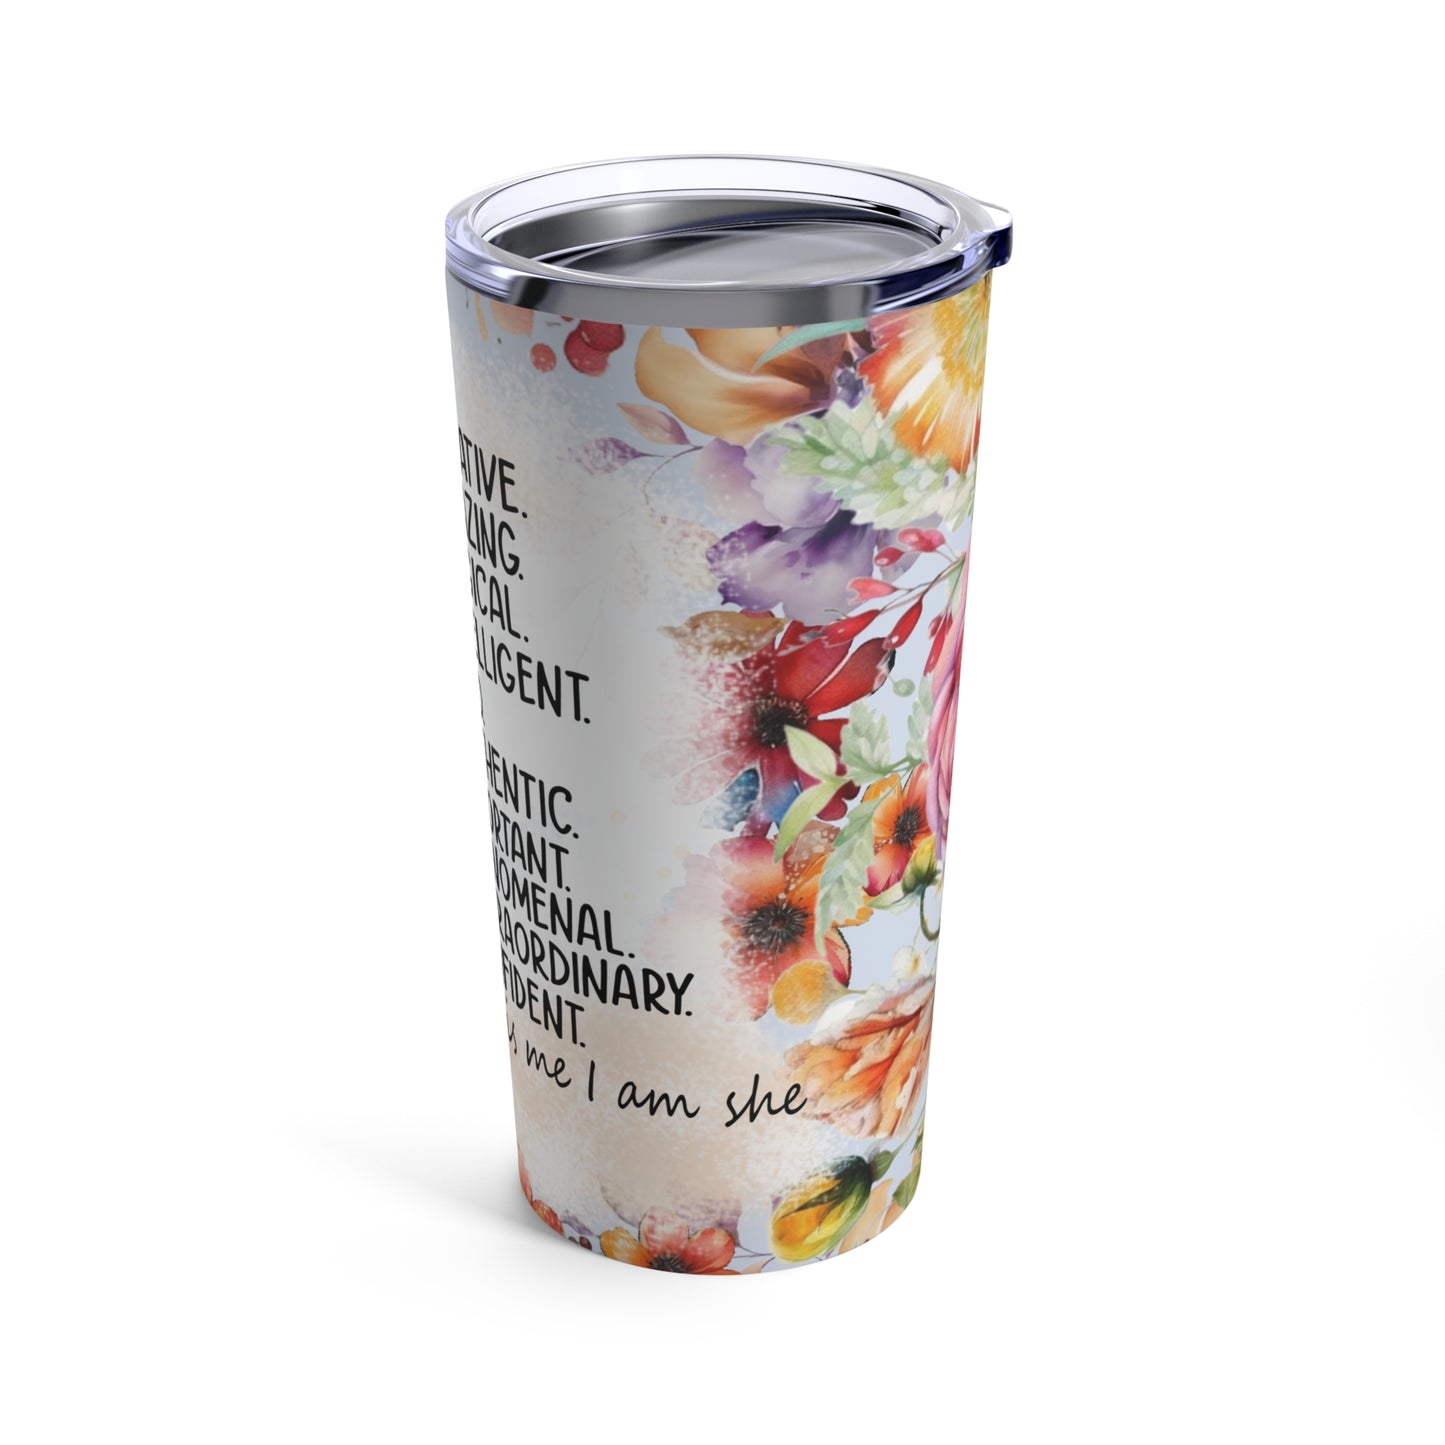 She is design #4, Mother's Day Gift, Wife, Sister, Significant Other, Girlfriend, Grandmother, Gift, Stainless Steel Tumbler 20oz